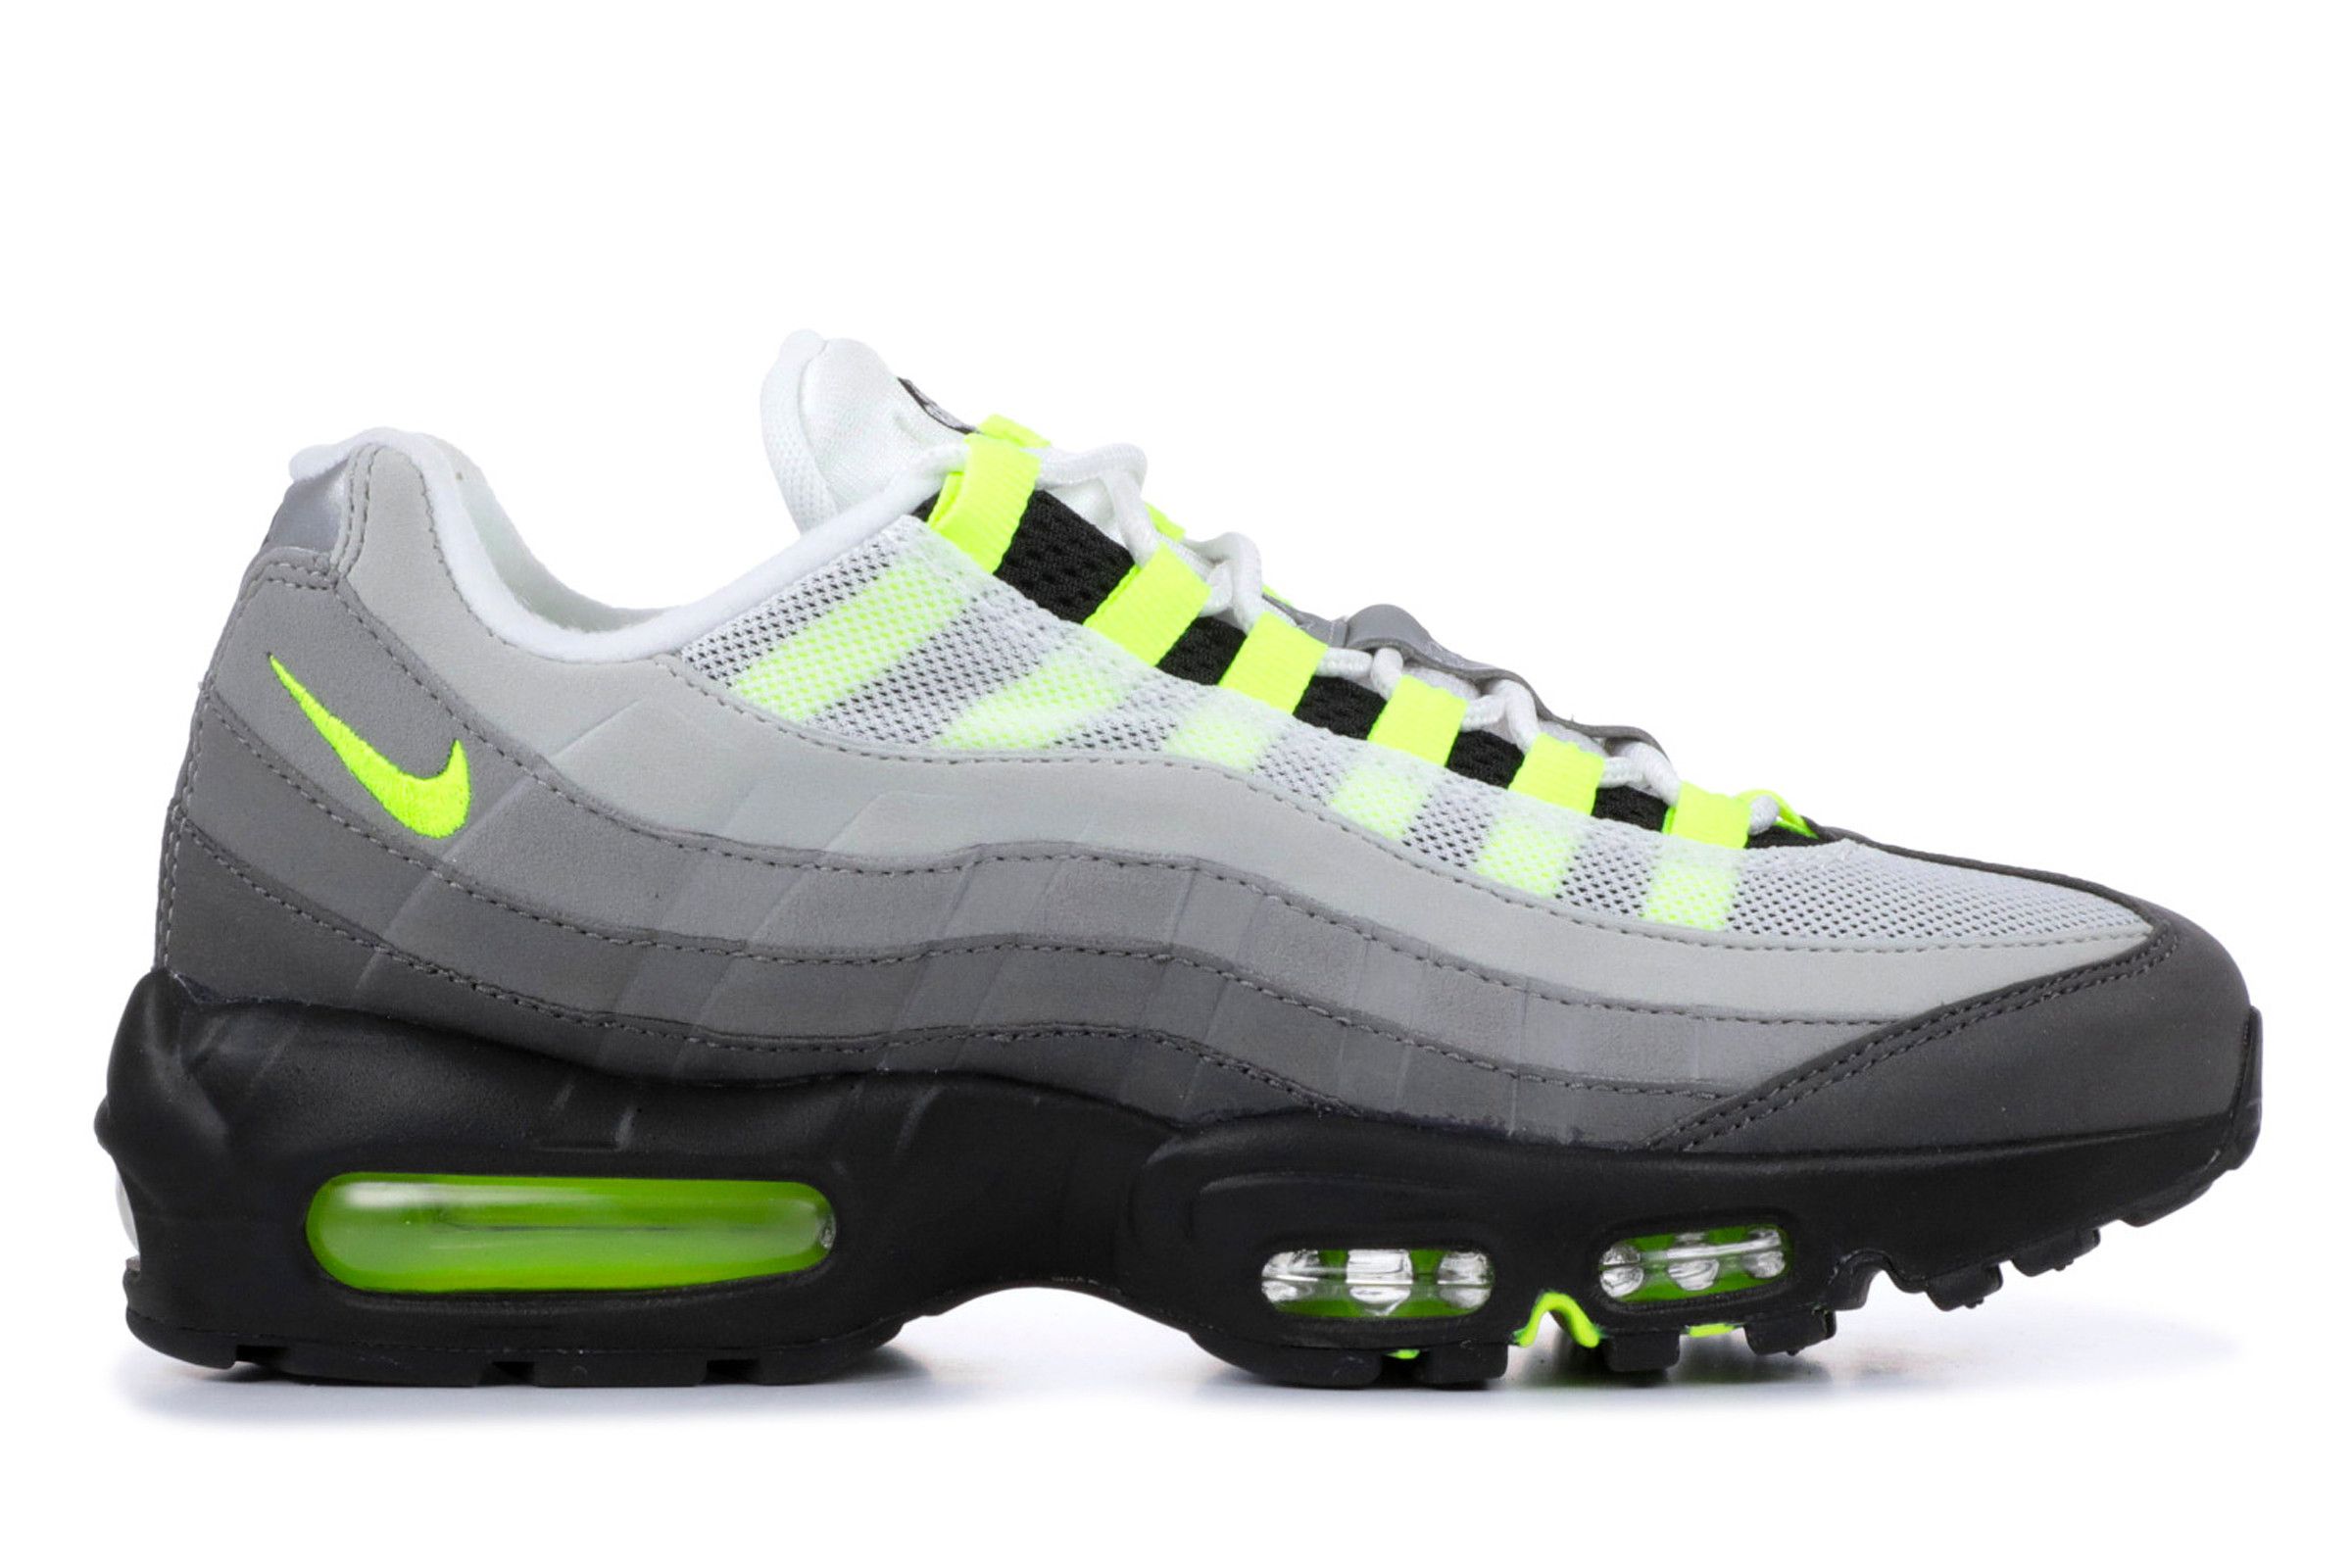 Nike Air max 95 JCRD Black and White Sneakers